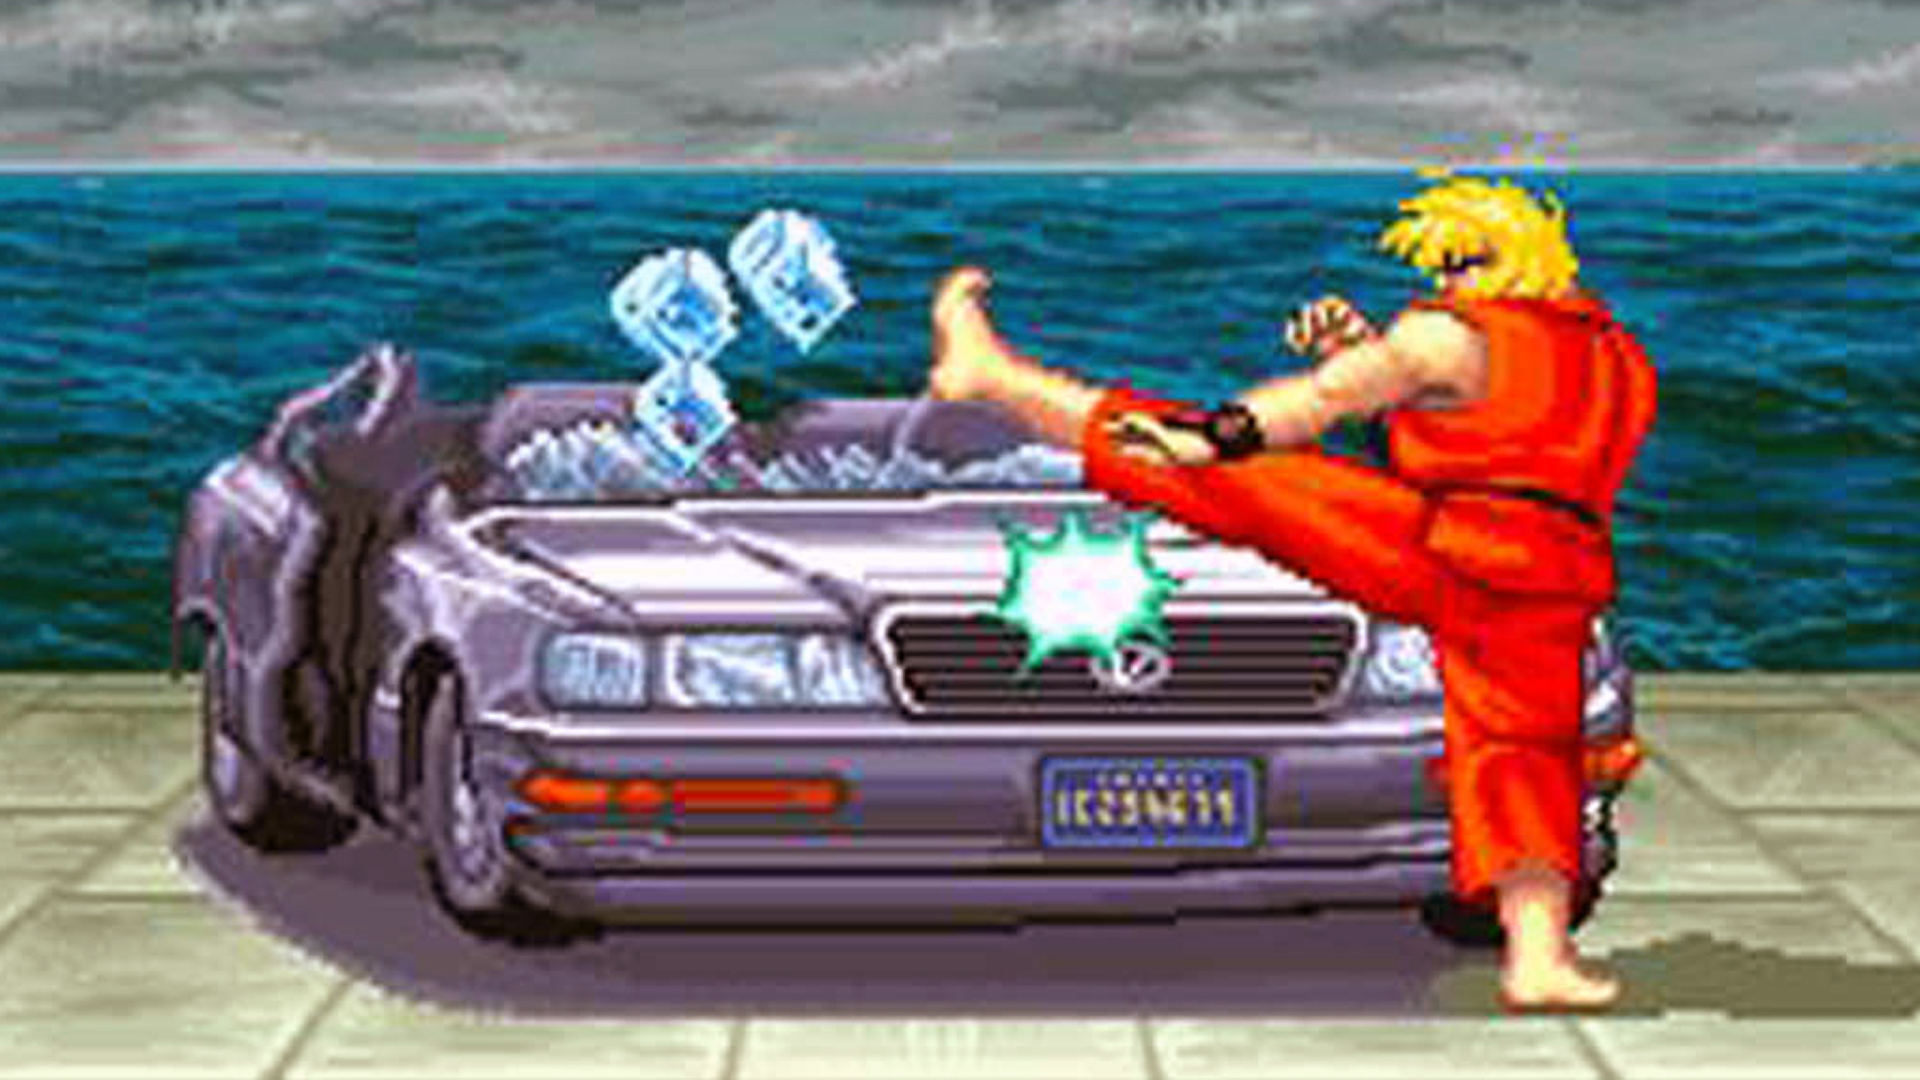 Capcom Arcade Stadium’s games can be bought separately, but there’s nothing new